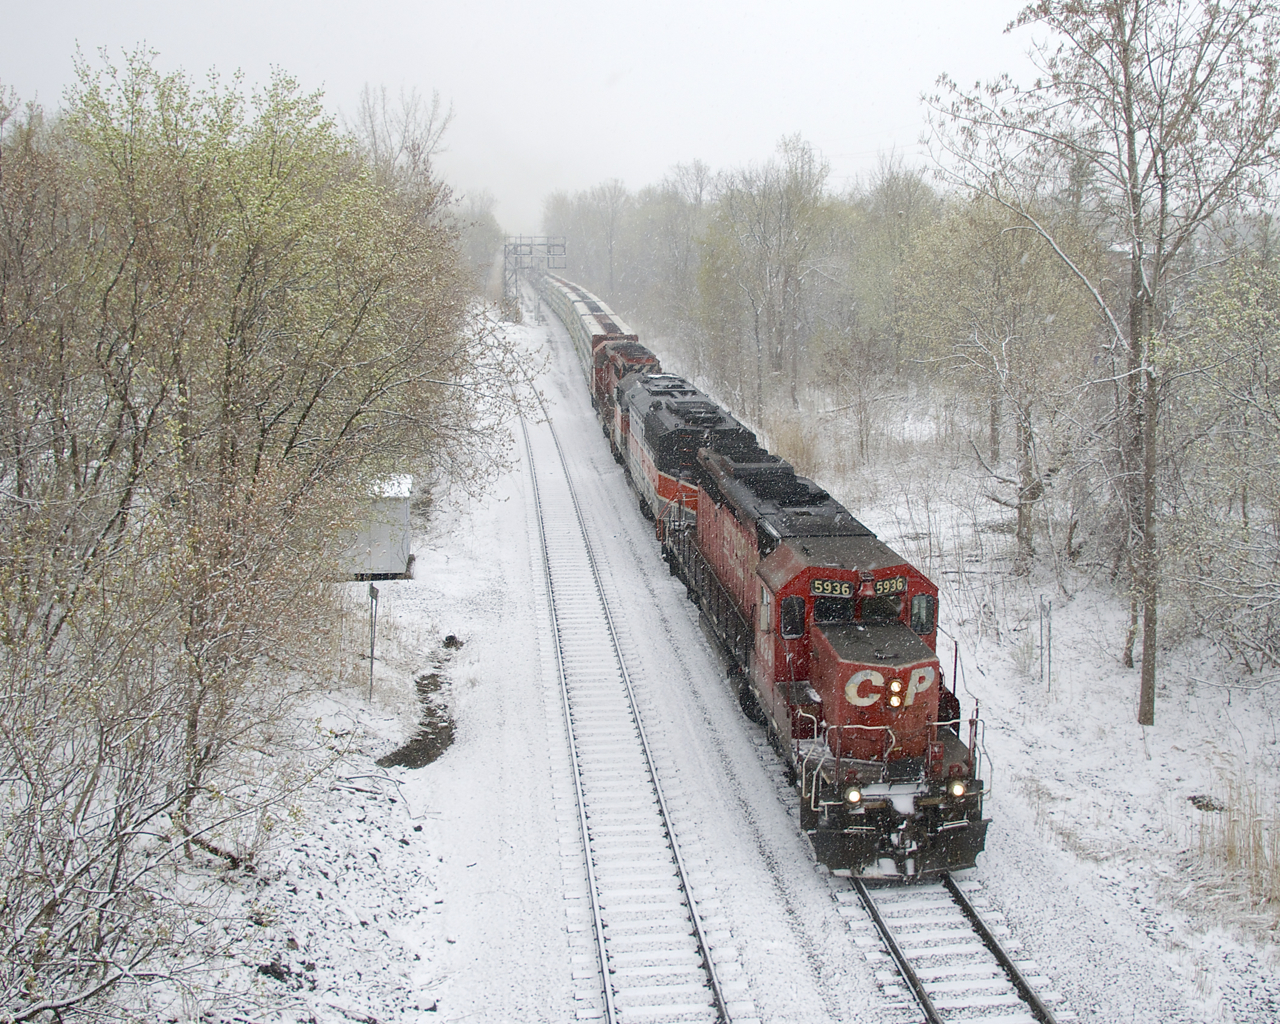 Snow is falling as CP 251 passes North Jct with an all-EMD lashup (CP 5936, CMQ 9017 & CP 6018). CP 251 has gone back to mostly having GE power, so this was a nice surprise. The snow was a not as nice surprise, but it does make for a nice photo.